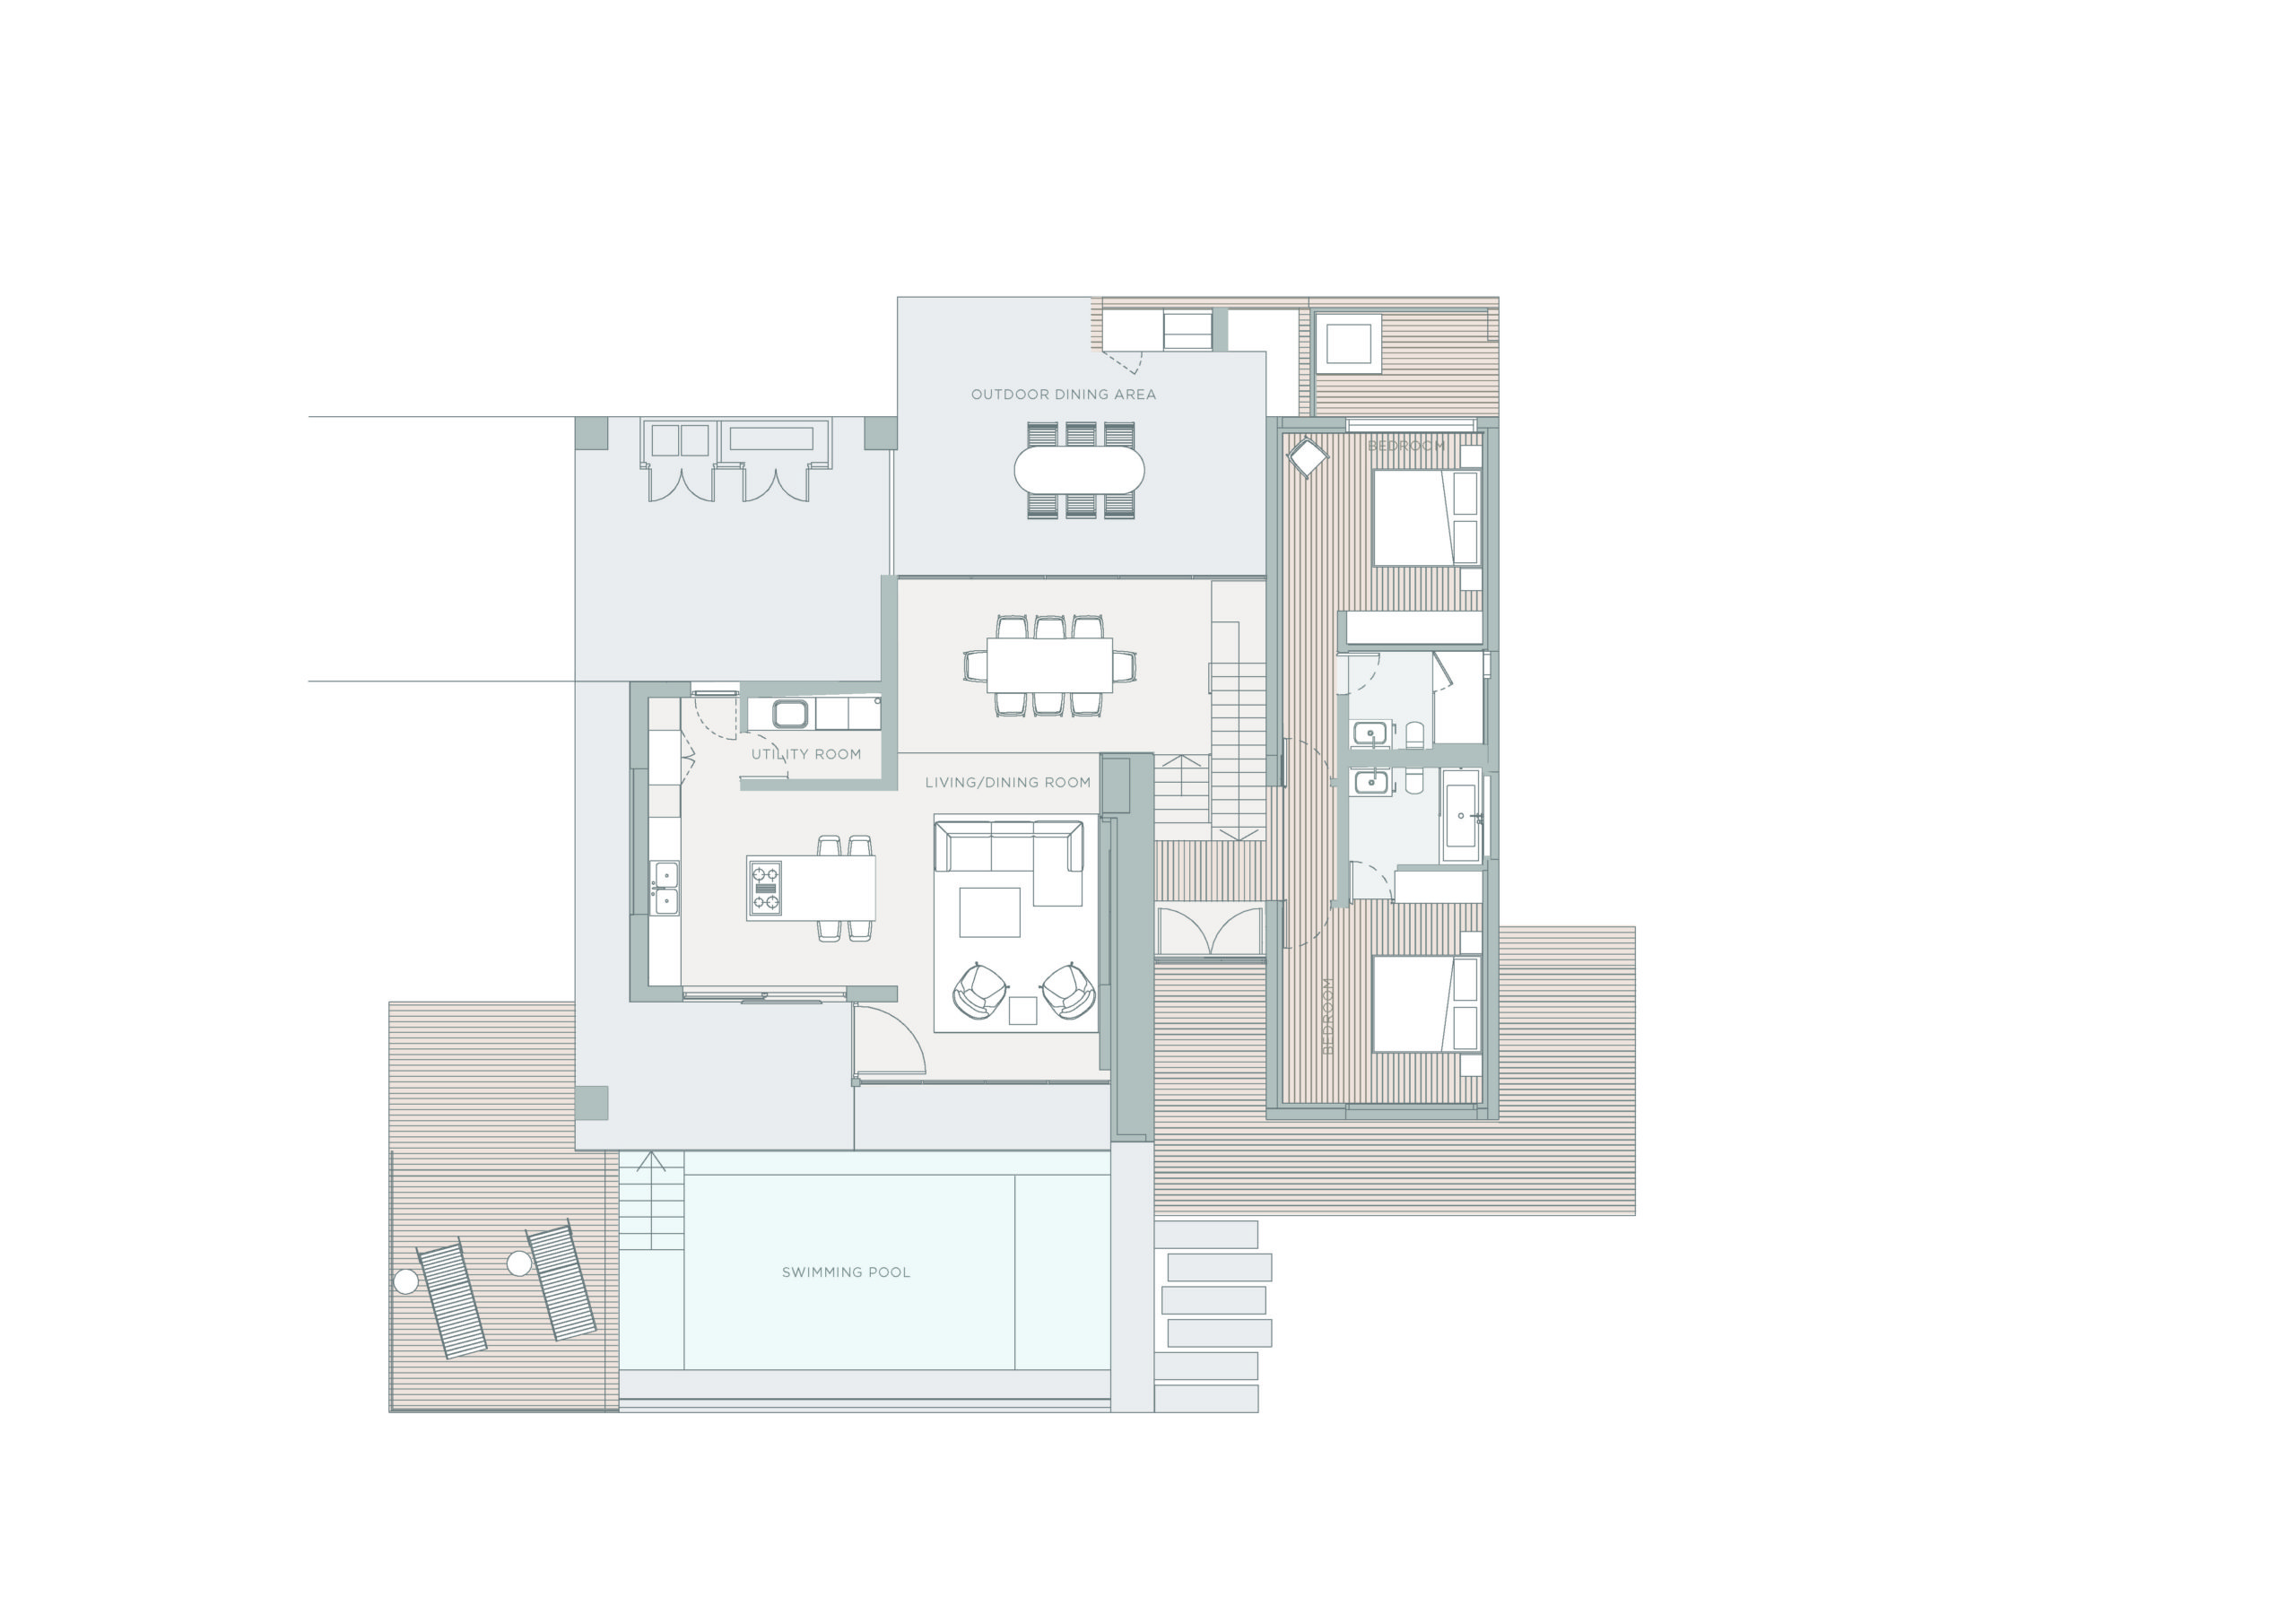 v292 ground and upper ground floor plan with colour scaled.jpg